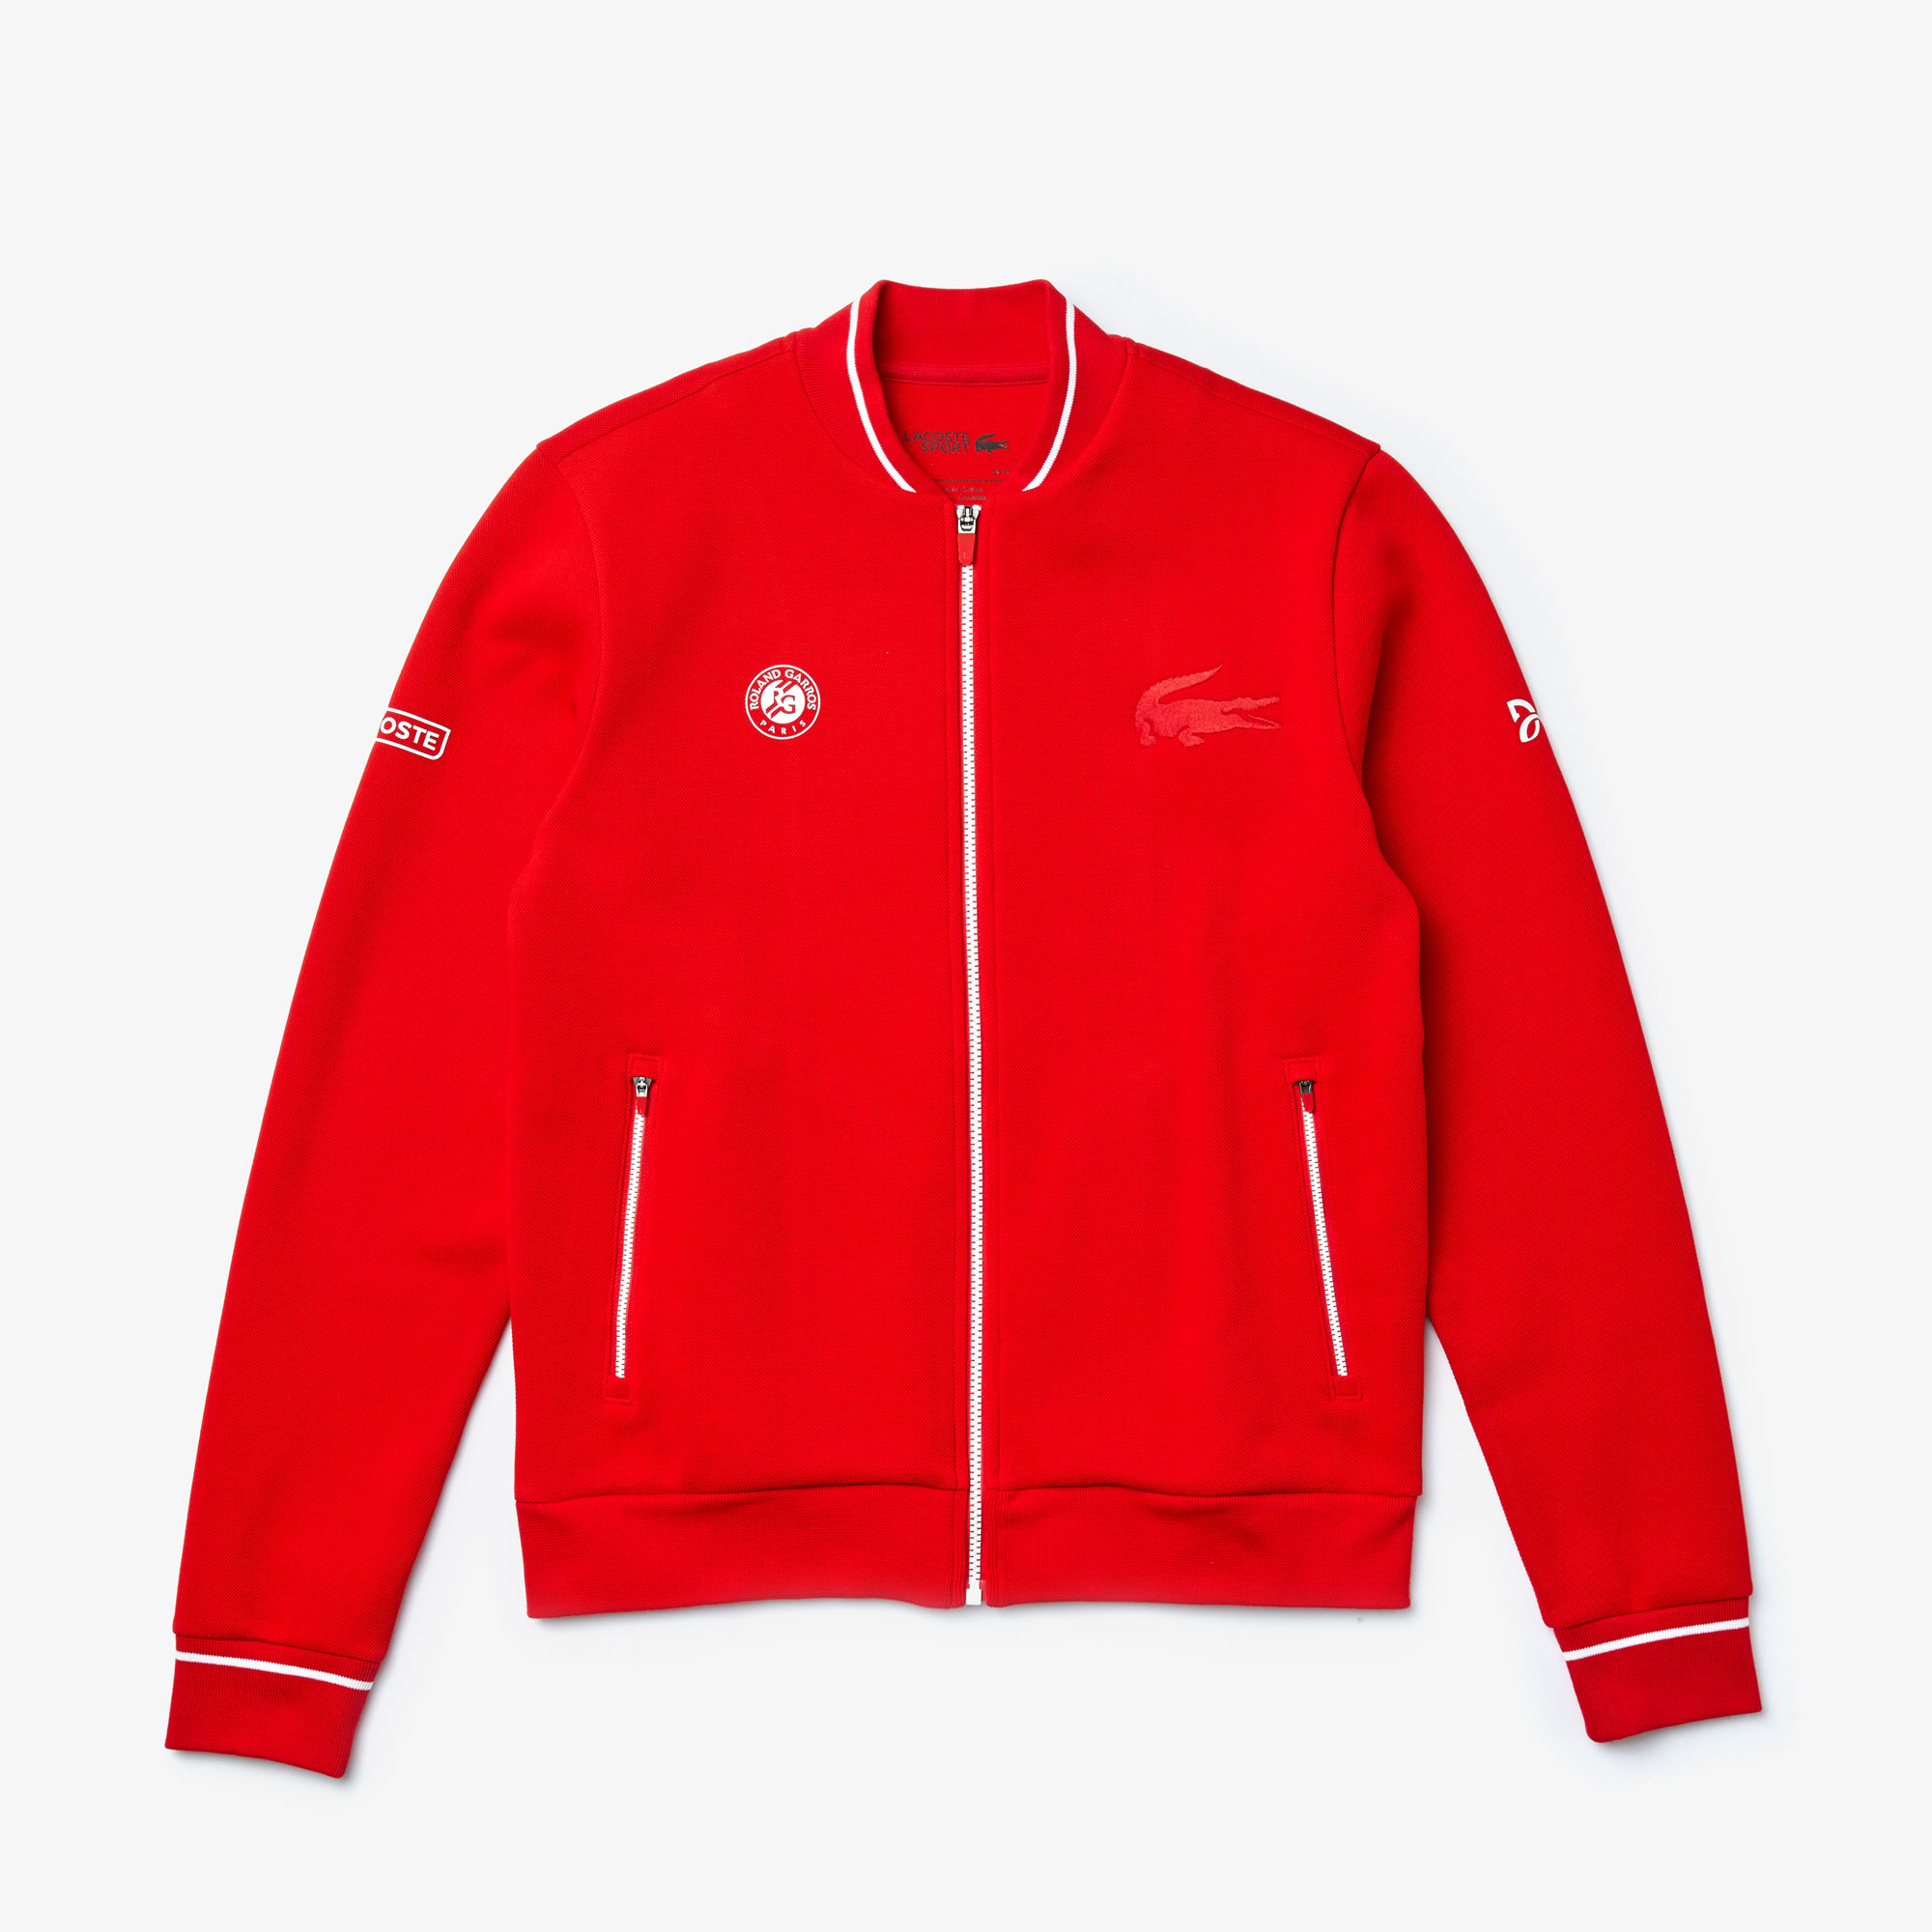 Lacoste ND Classic Mens Tennis Jacket - Red/White | Wigmore Sports